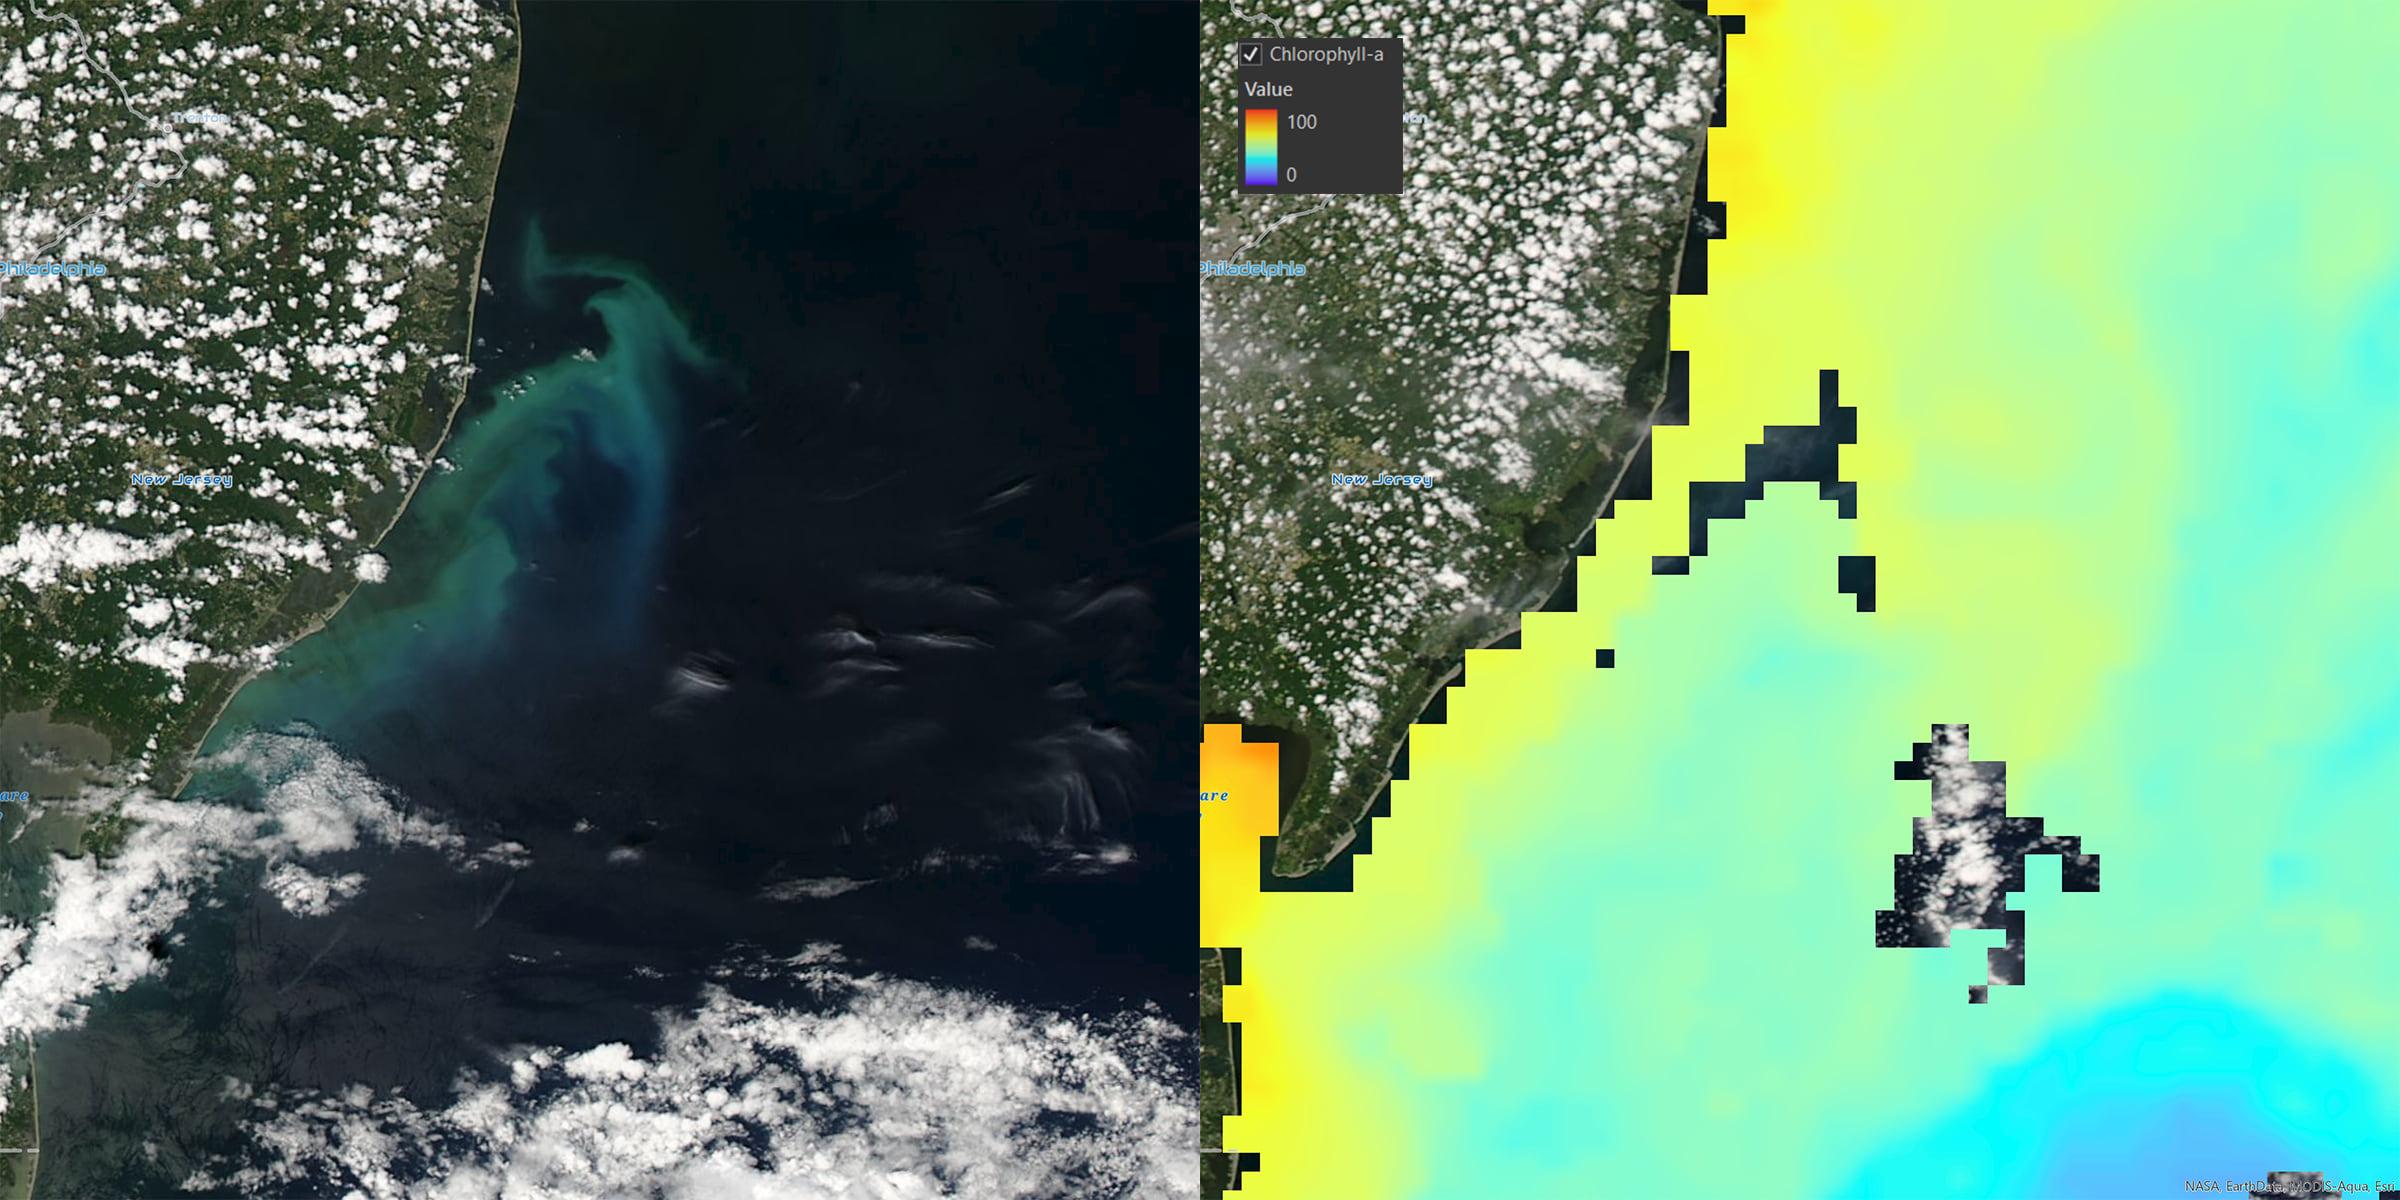 Phytoplankton Bloom off the coast of New Jersey - July 6, 2016. MODIS